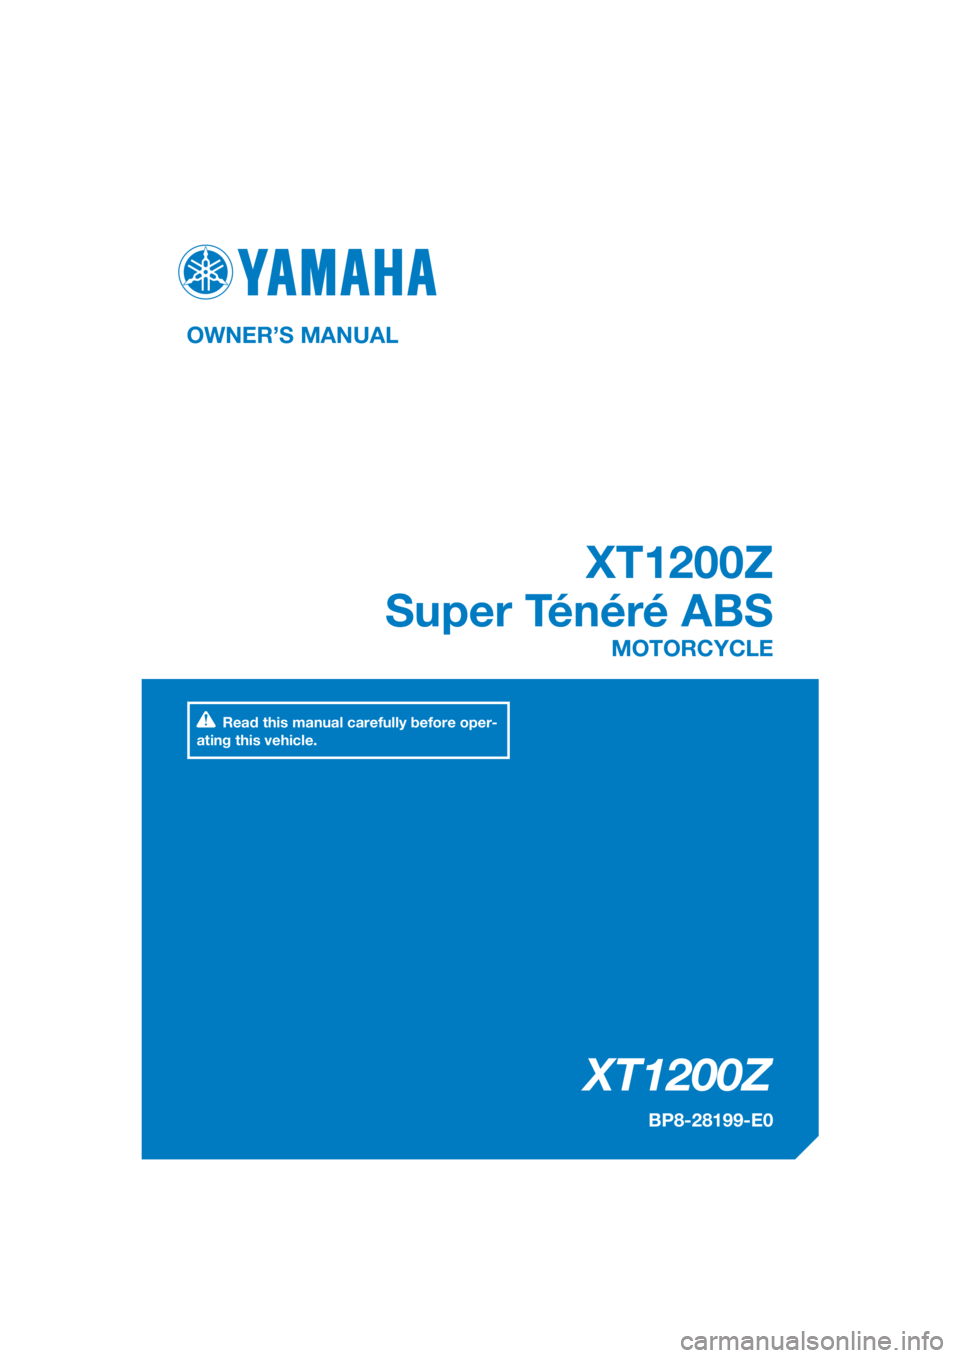 YAMAHA XT1200Z 2017  Owners Manual DIC183
XT1200Z
XT1200Z
Super Ténéré ABS
OWNER’S MANUAL
BP8-28199-E0
MOTORCYCLE
[English  (E)]
Read this manual carefully before oper-
ating this vehicle. 